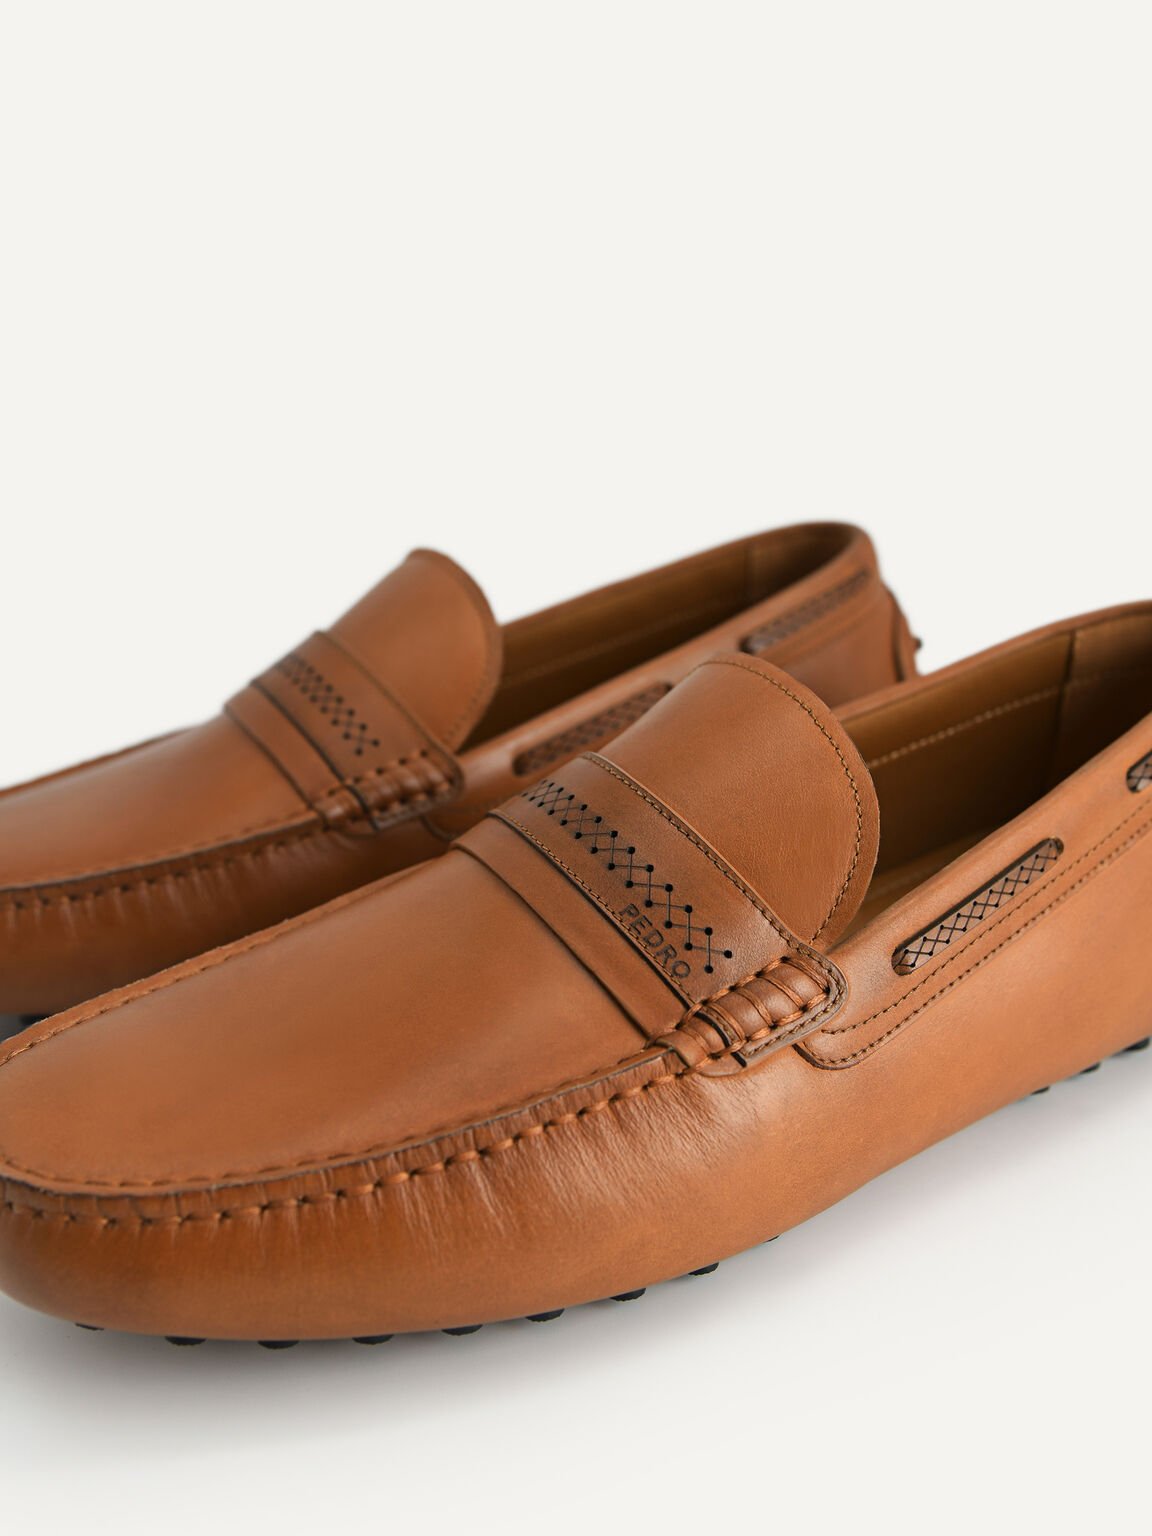 Leather Moccasins with Stitch Detailing, Camel